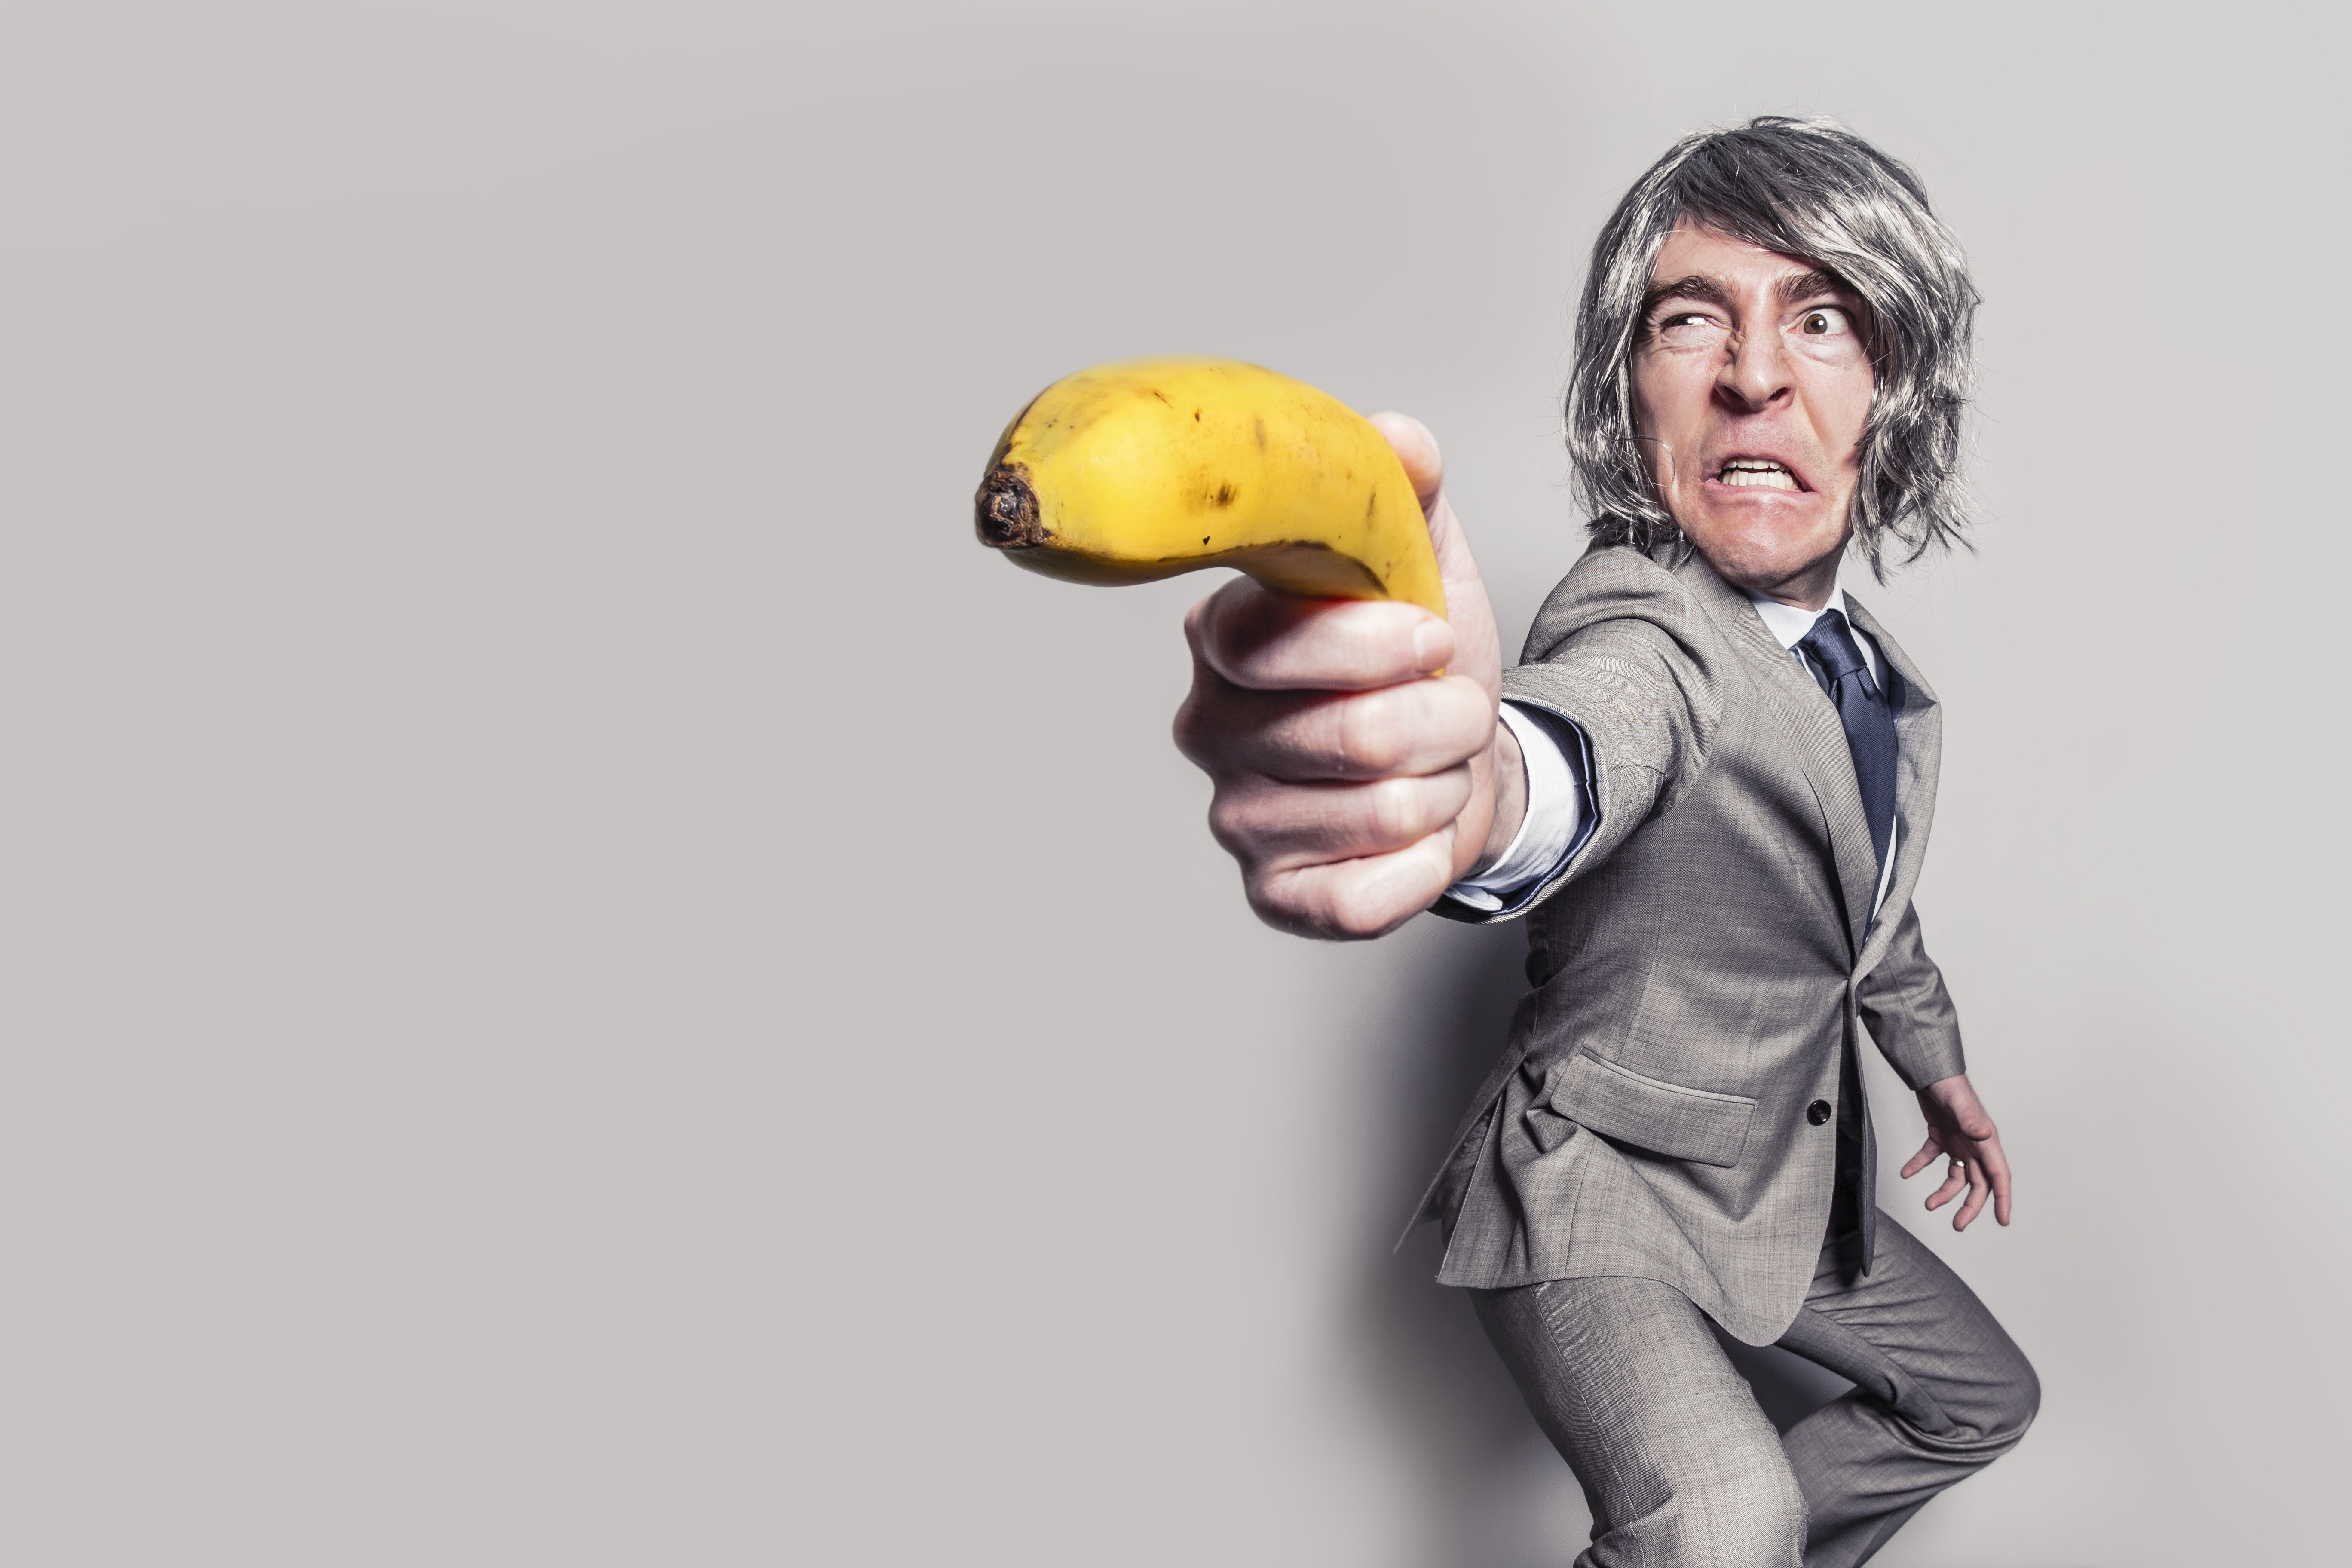 Man in gray suit jacket holding yellow banana fruit while making face photo